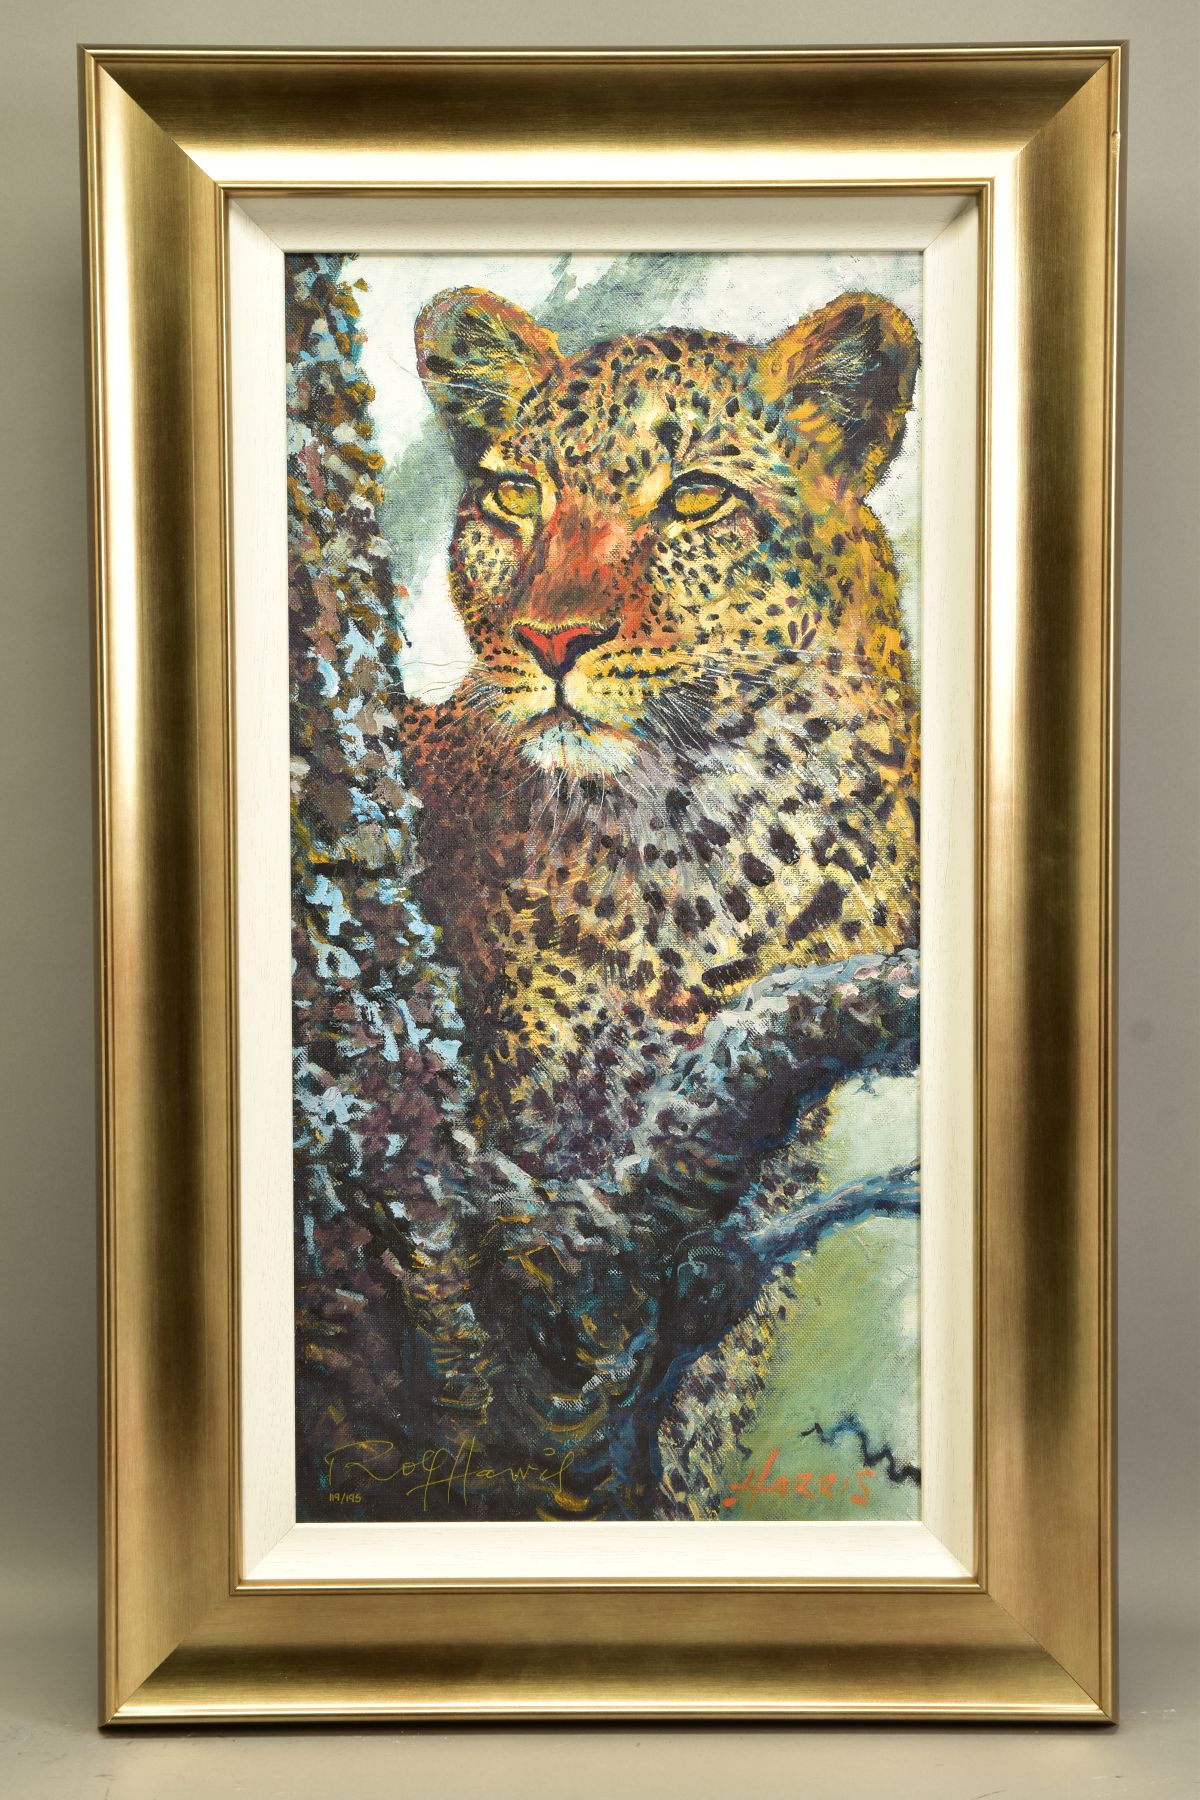 ROLF HARRIS (AUSTRALIAN 1930) 'ALERT FOR PREY' a signed limited edition print of a leopard 119/